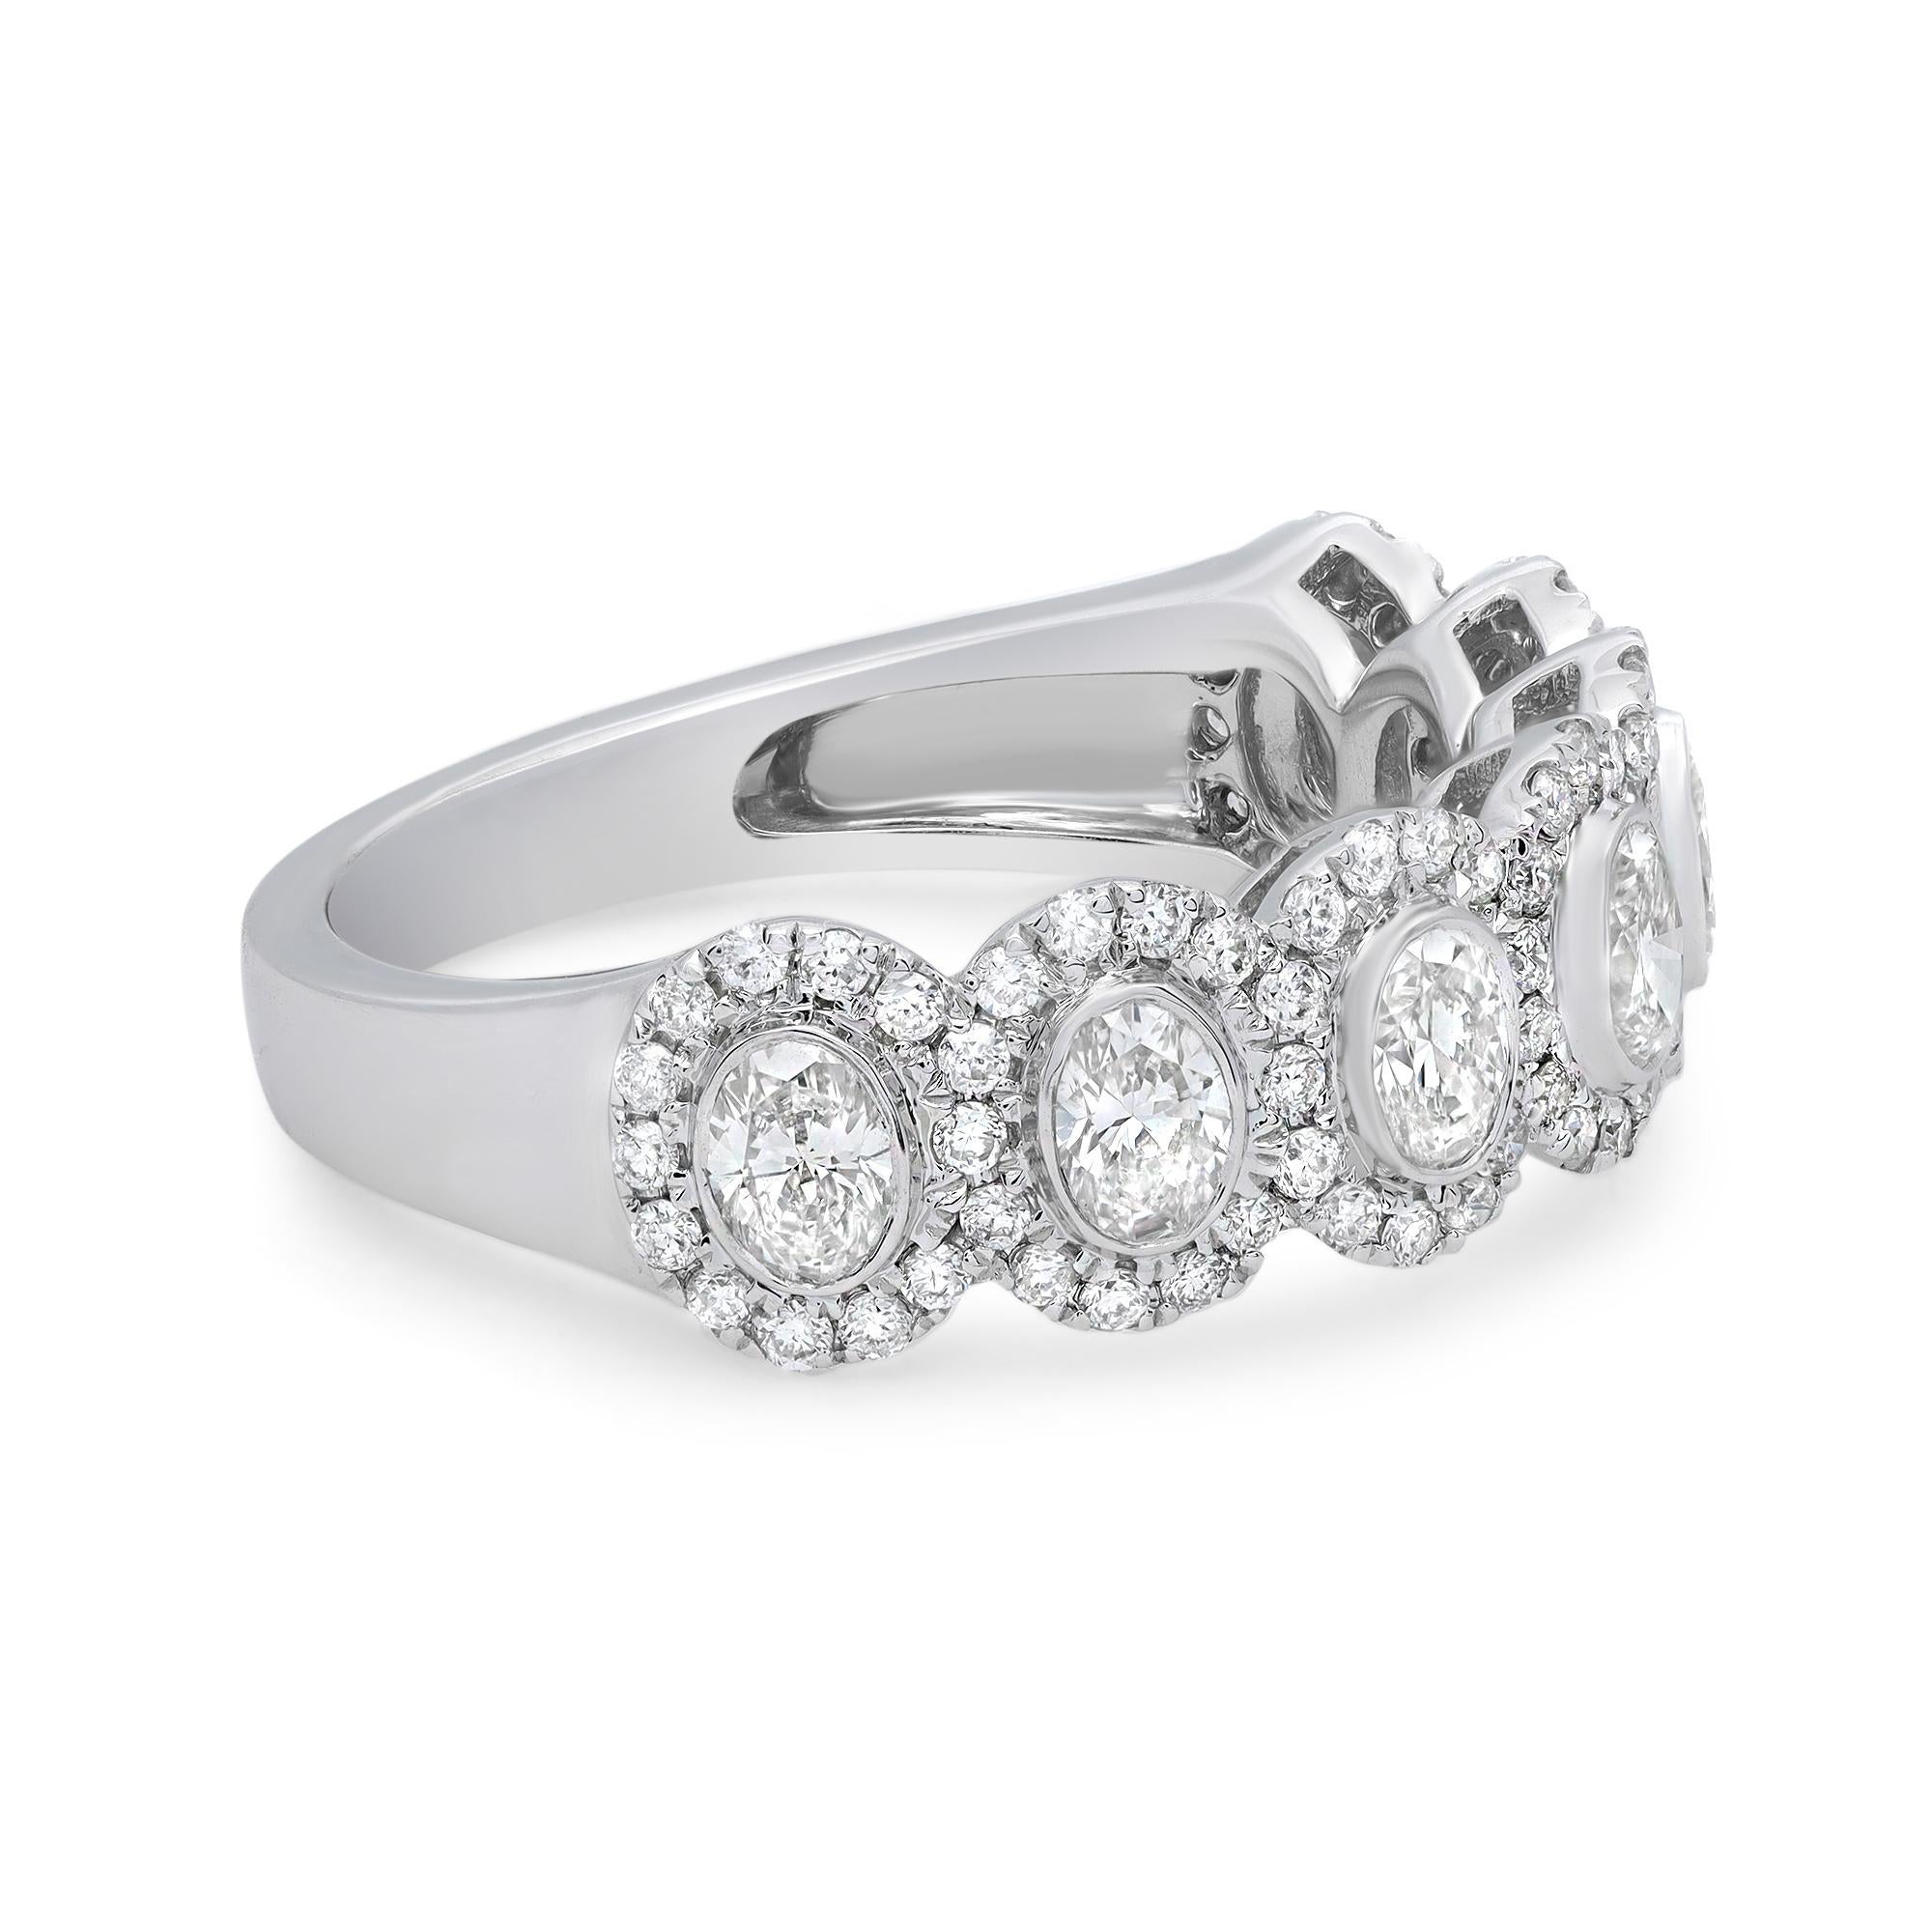 Stunning oval cut diamonds embraced by a halo of additional diamond accents in this enchanting ladies wedding band ring. Expertly crafted in 18K white gold. Total diamond weight: 1.33 carats. Diamond color H-J and clarity VS. Ring size: 6.5. Width: